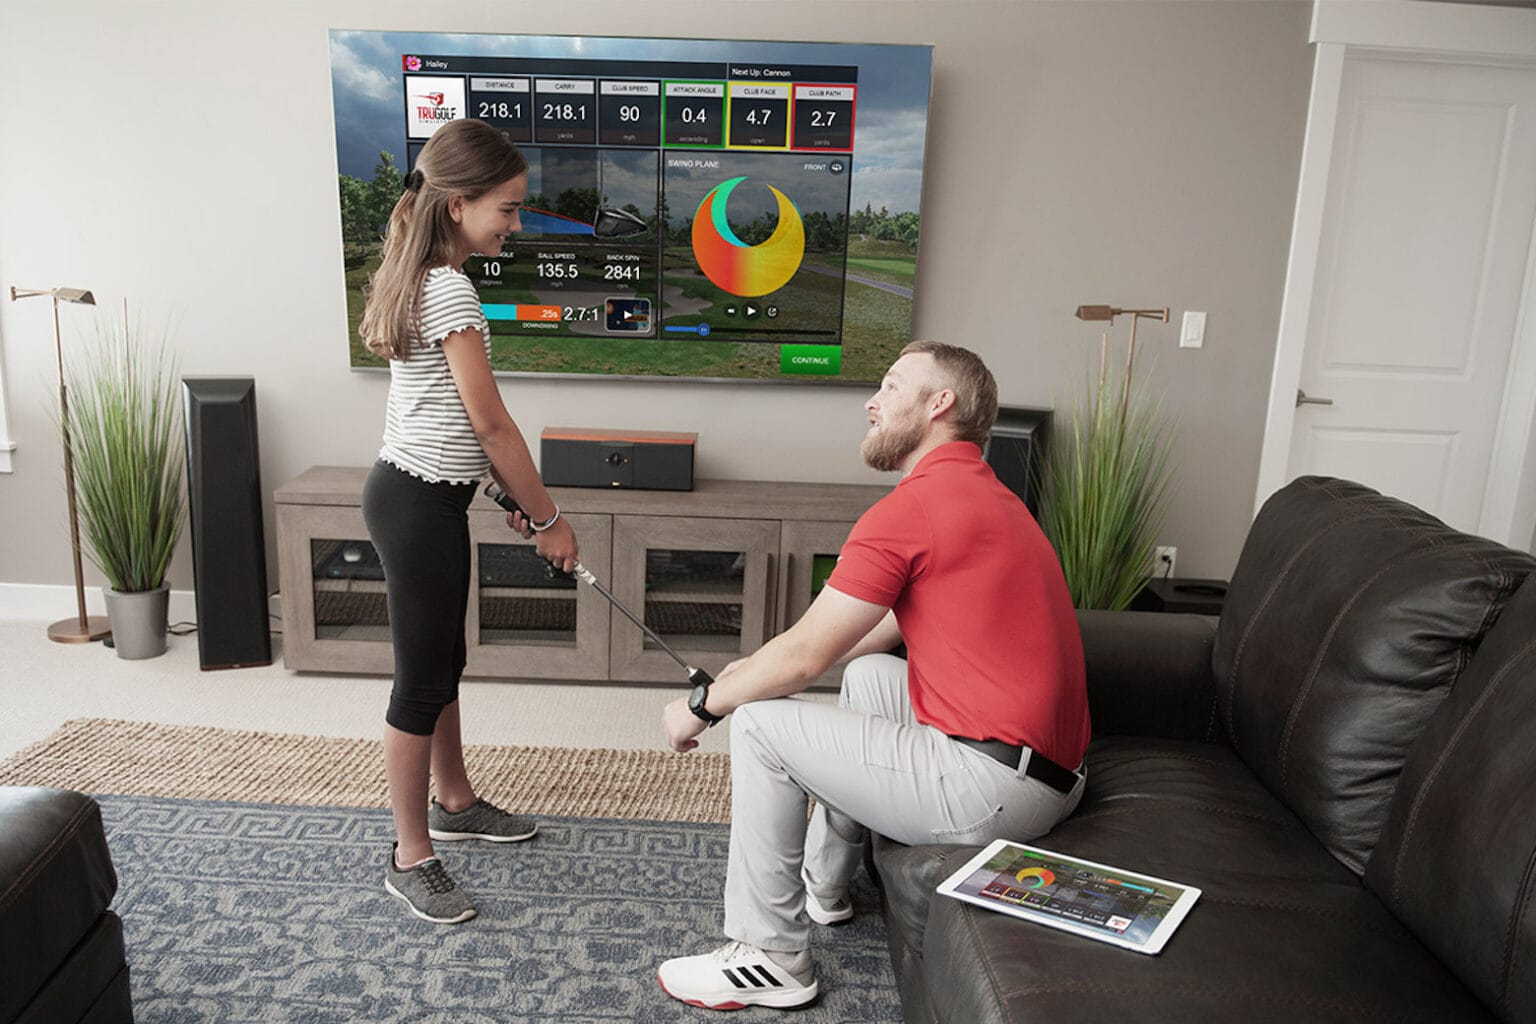 Get $100 off this state-of-the-art golf simulator loved by golfers.